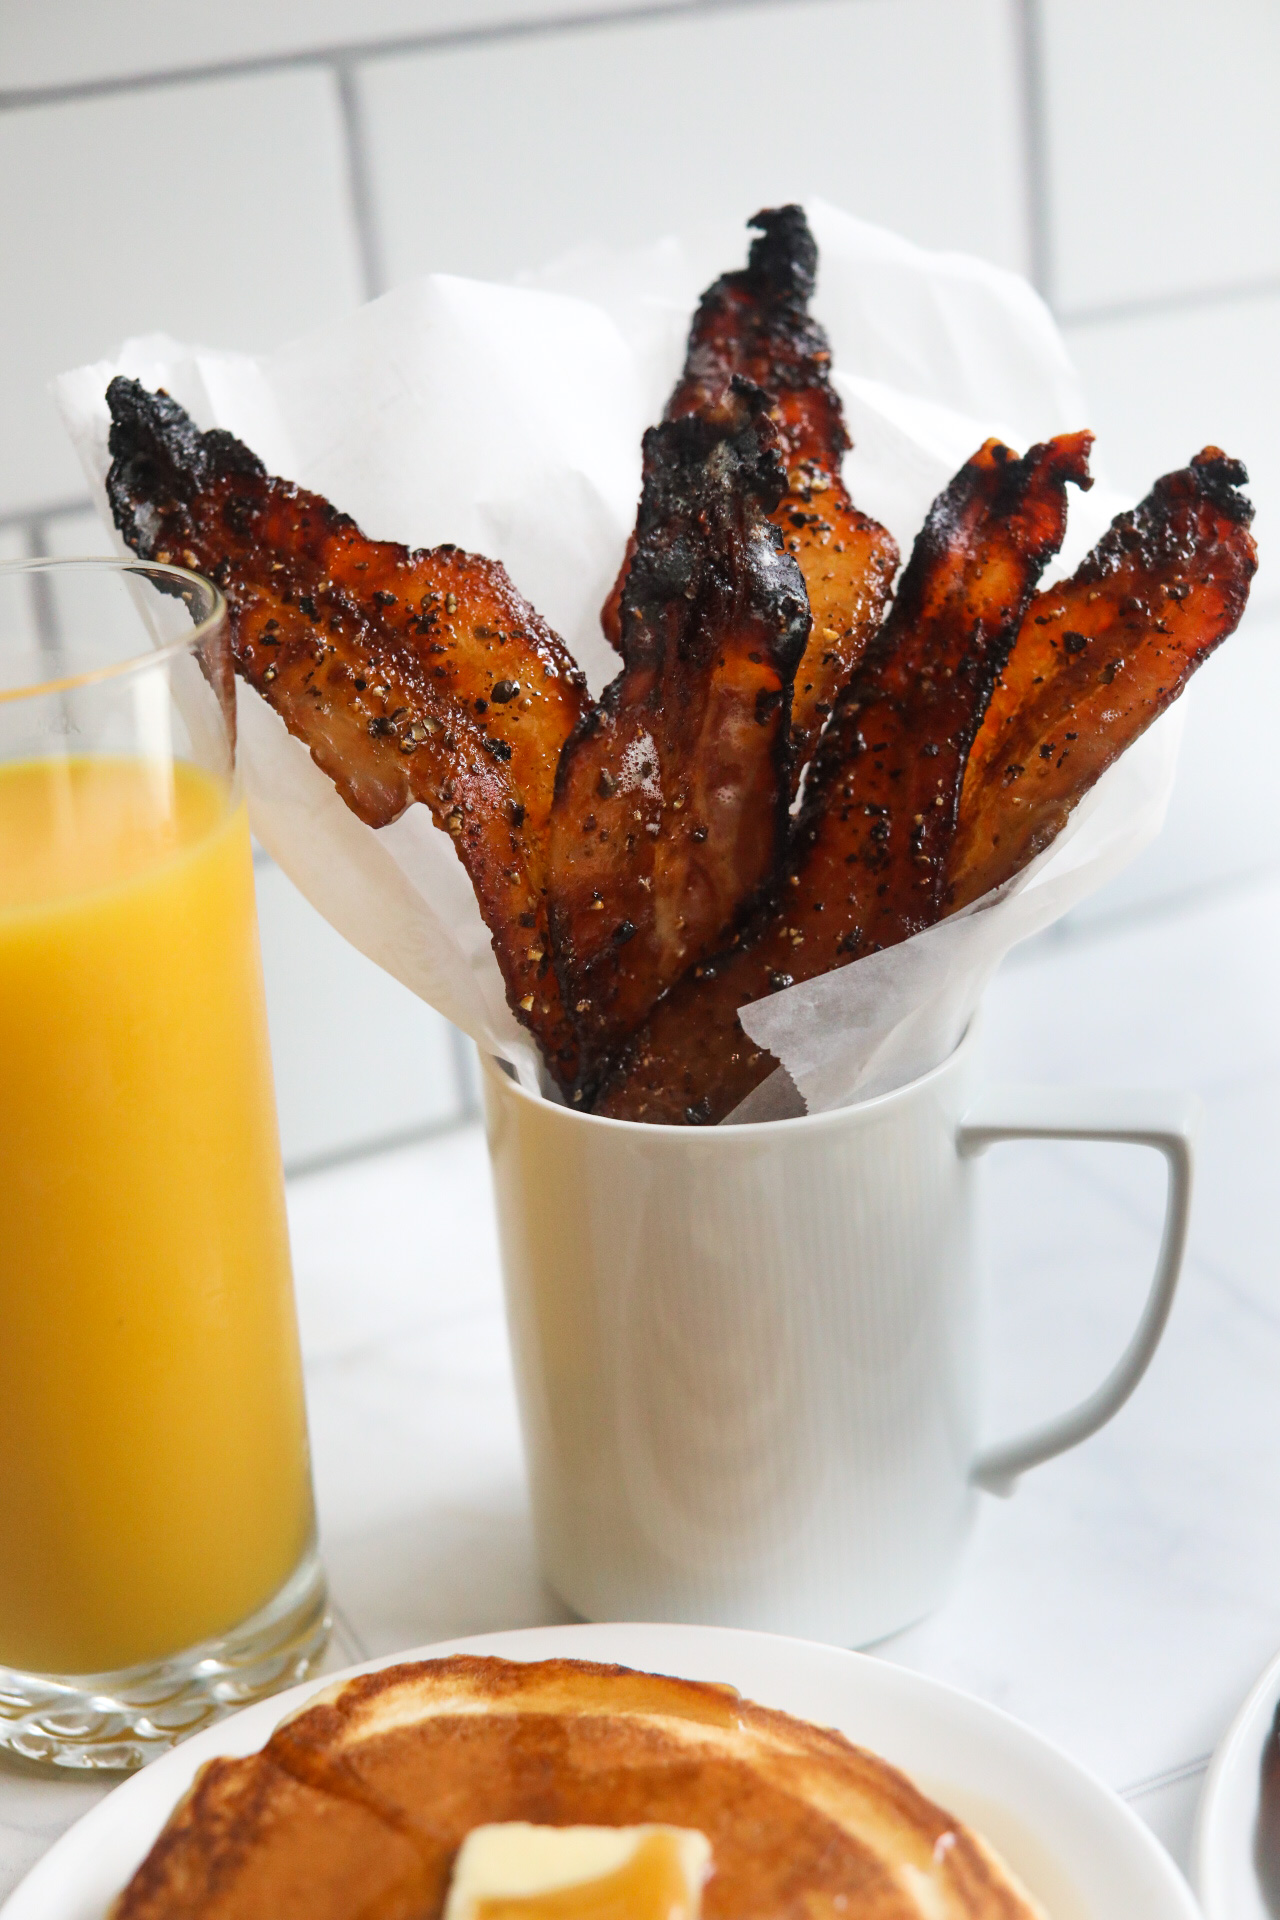 Maple candied bacon in white coffee cup with parchment paper lining the bacon. A glass of orange juice and a small plate of pancakes with butter on top is shown for styling purposes.